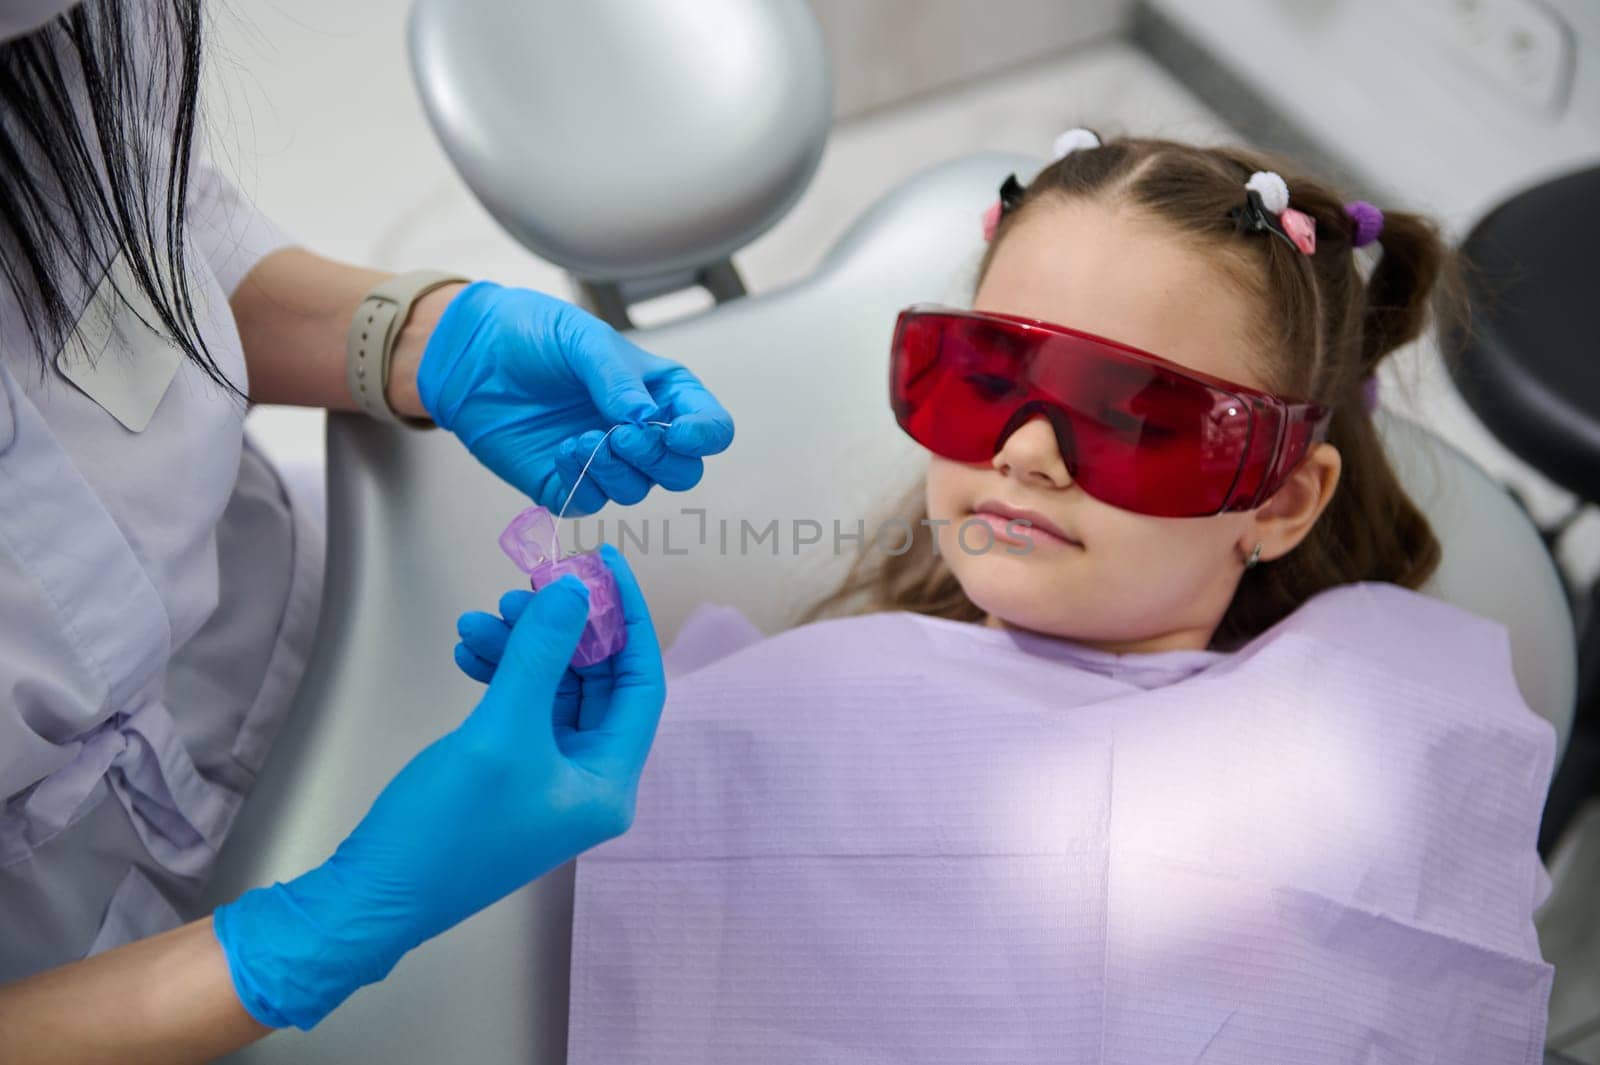 Cute child girl listens to a dental hygienist explaining how to clean teeth using a dental floss after teeth brushing by artgf